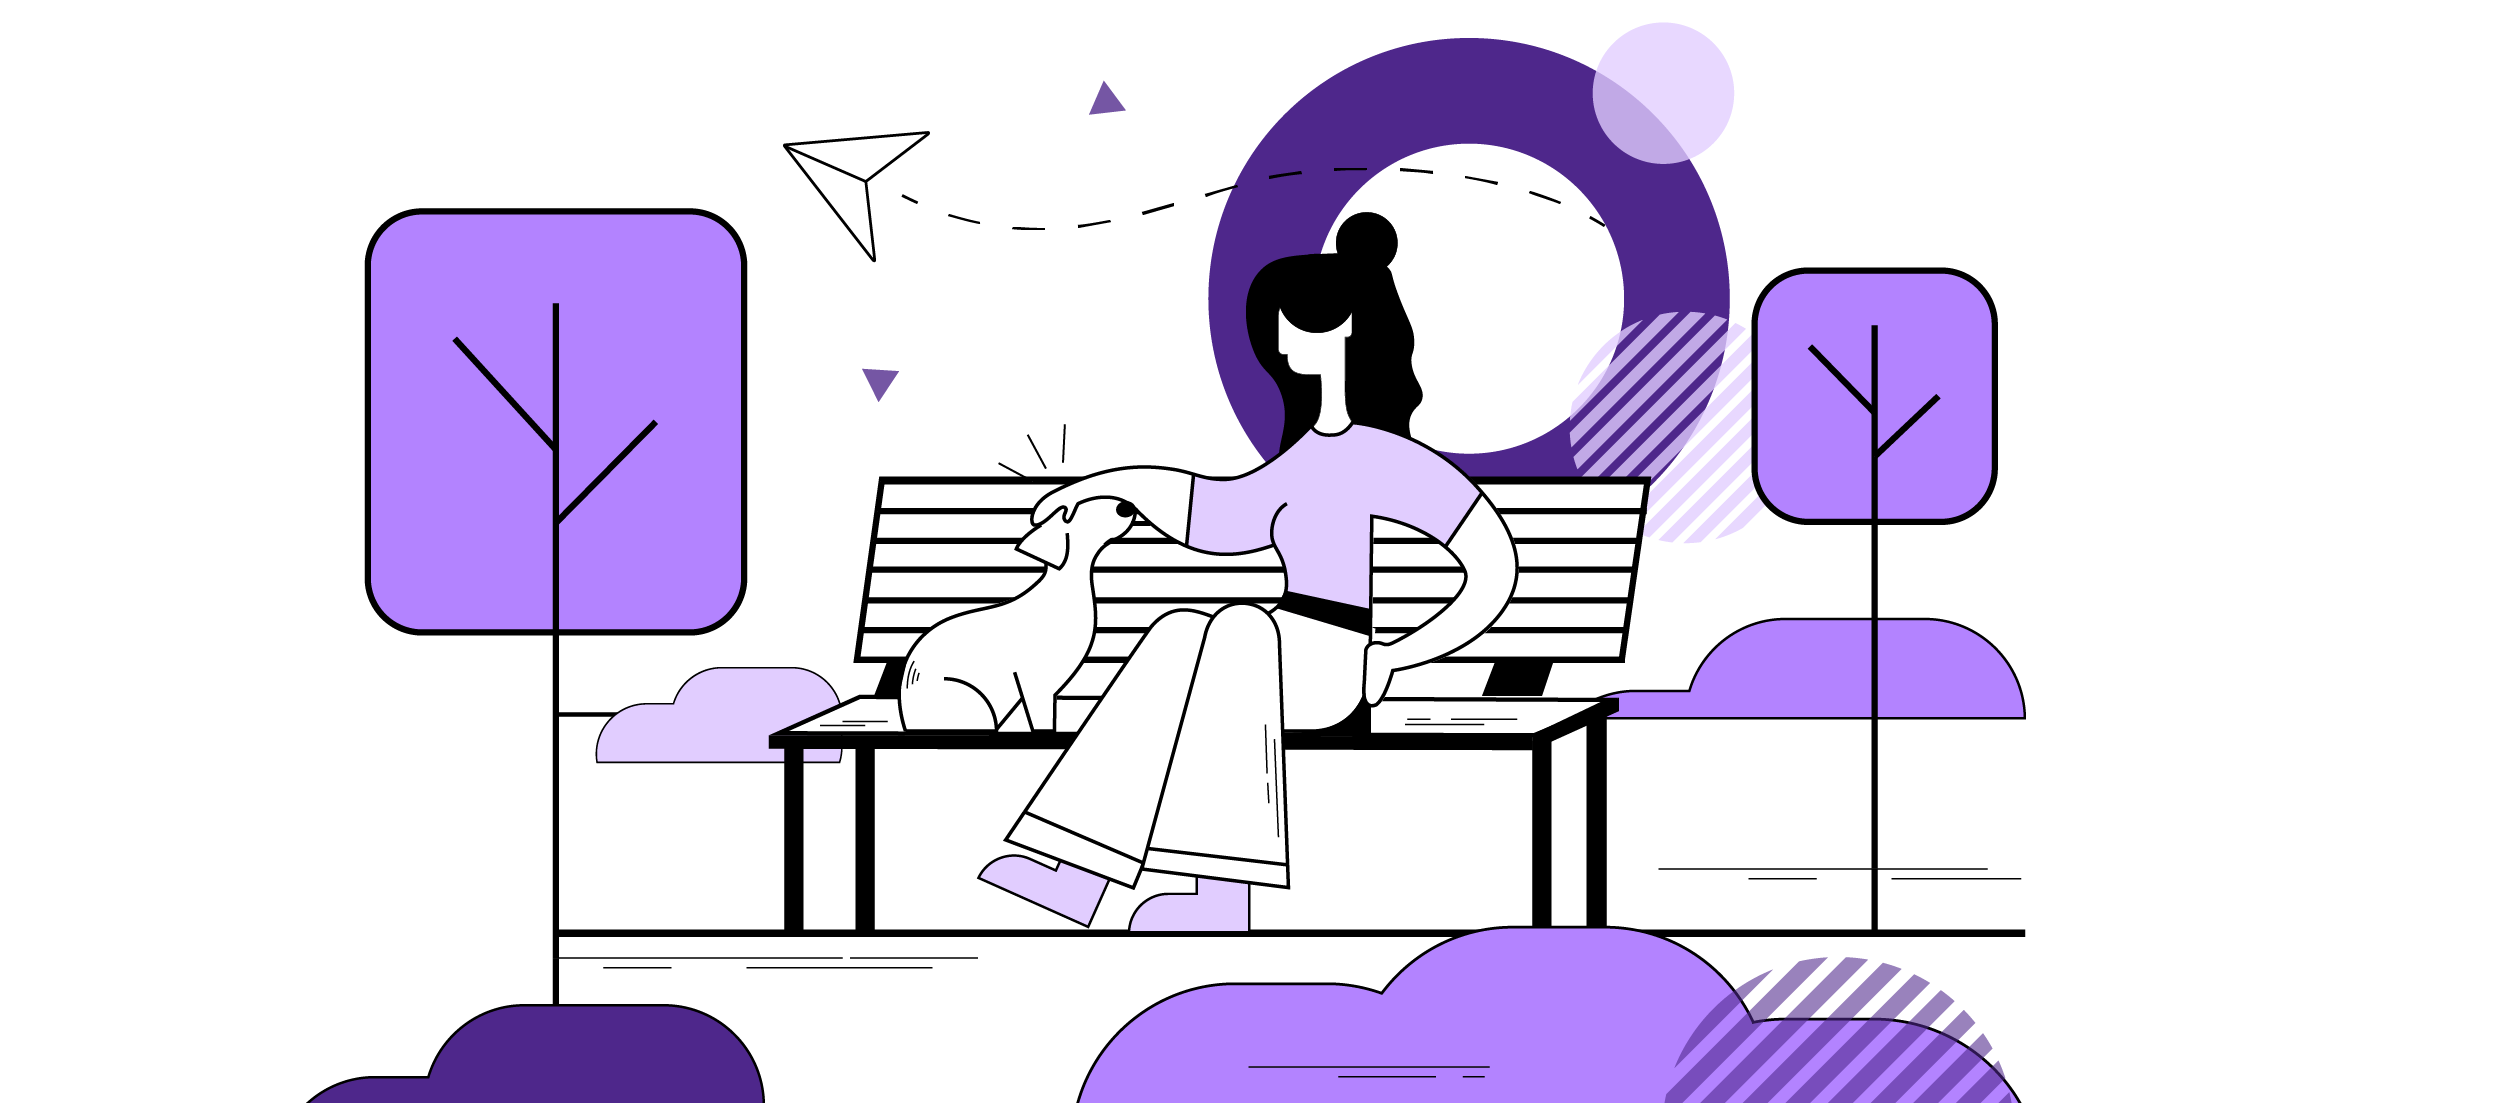 An illustration of a resident and her dog on a bench in a property's outdoor common area.